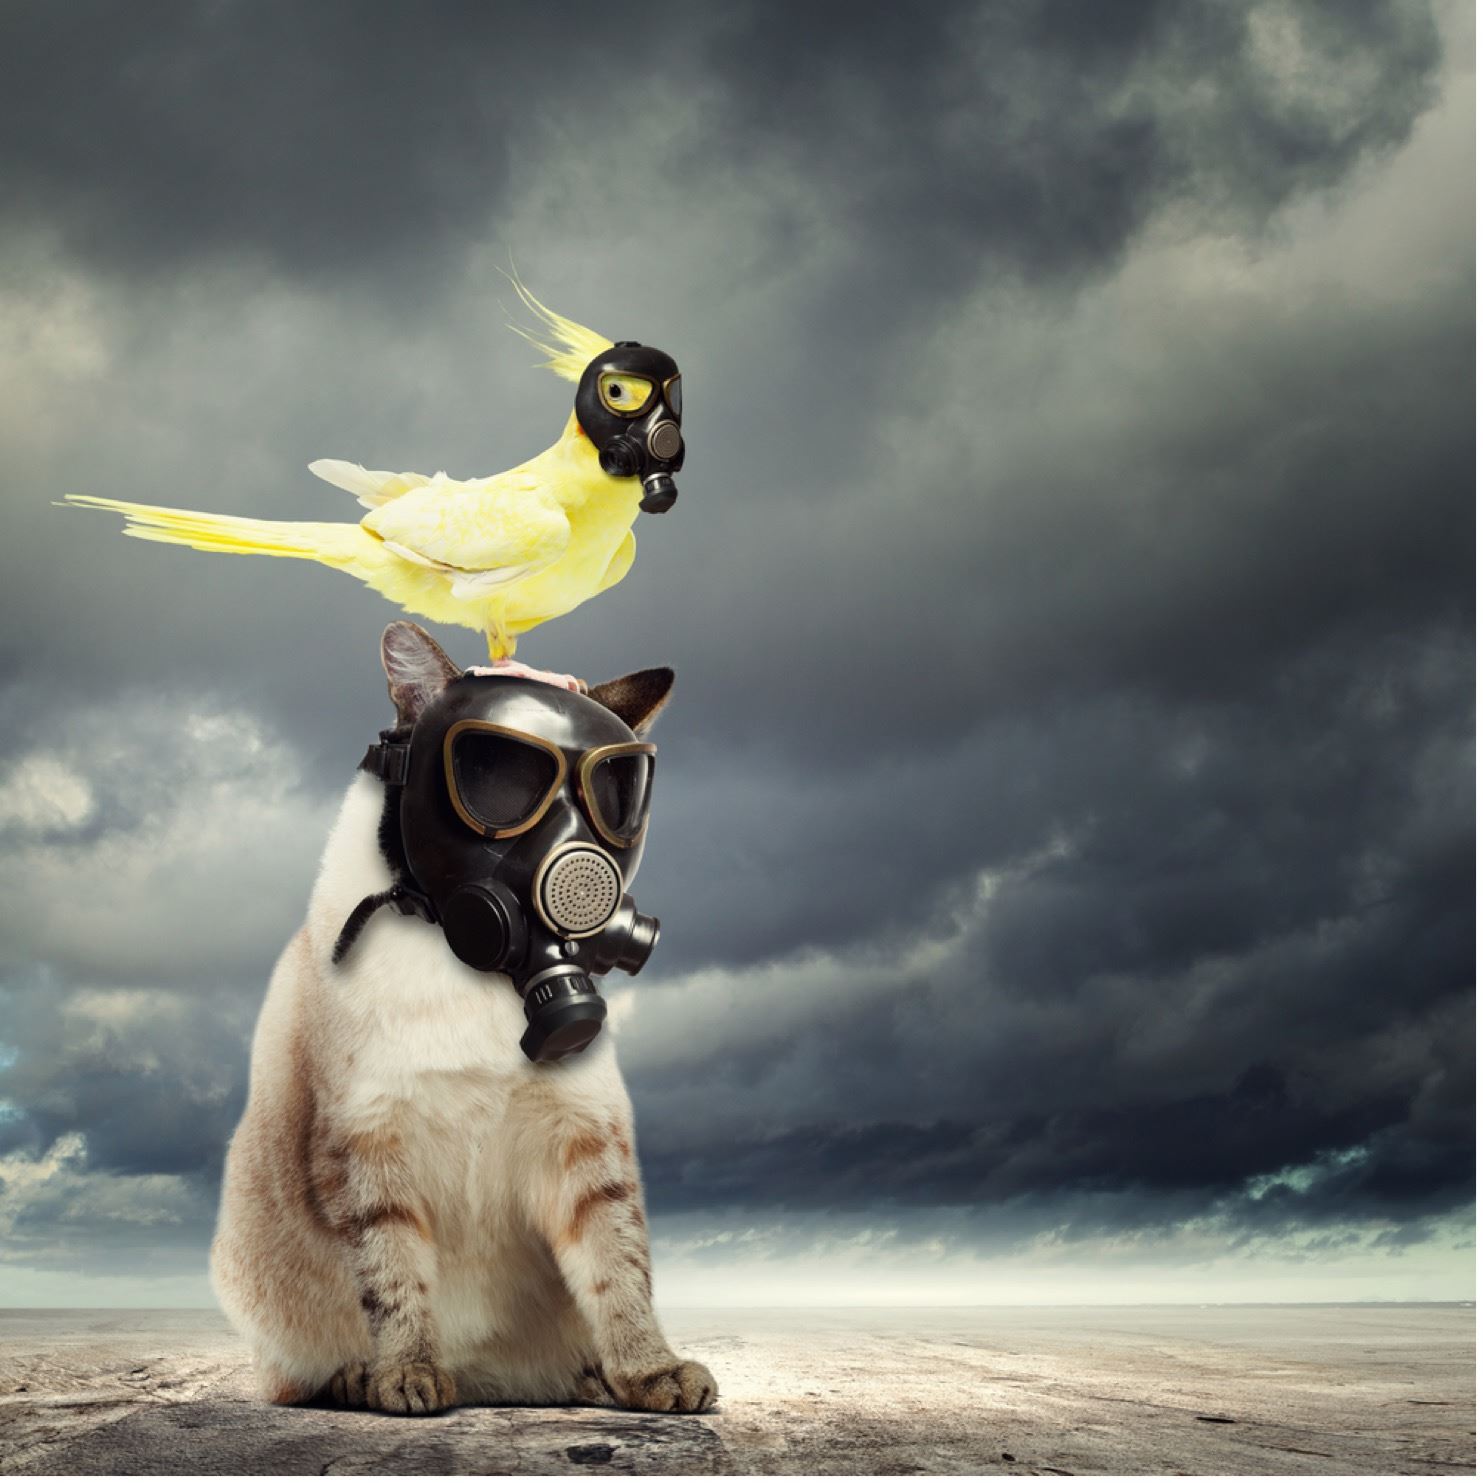 cat with a canary on its head, both wearing gas masks